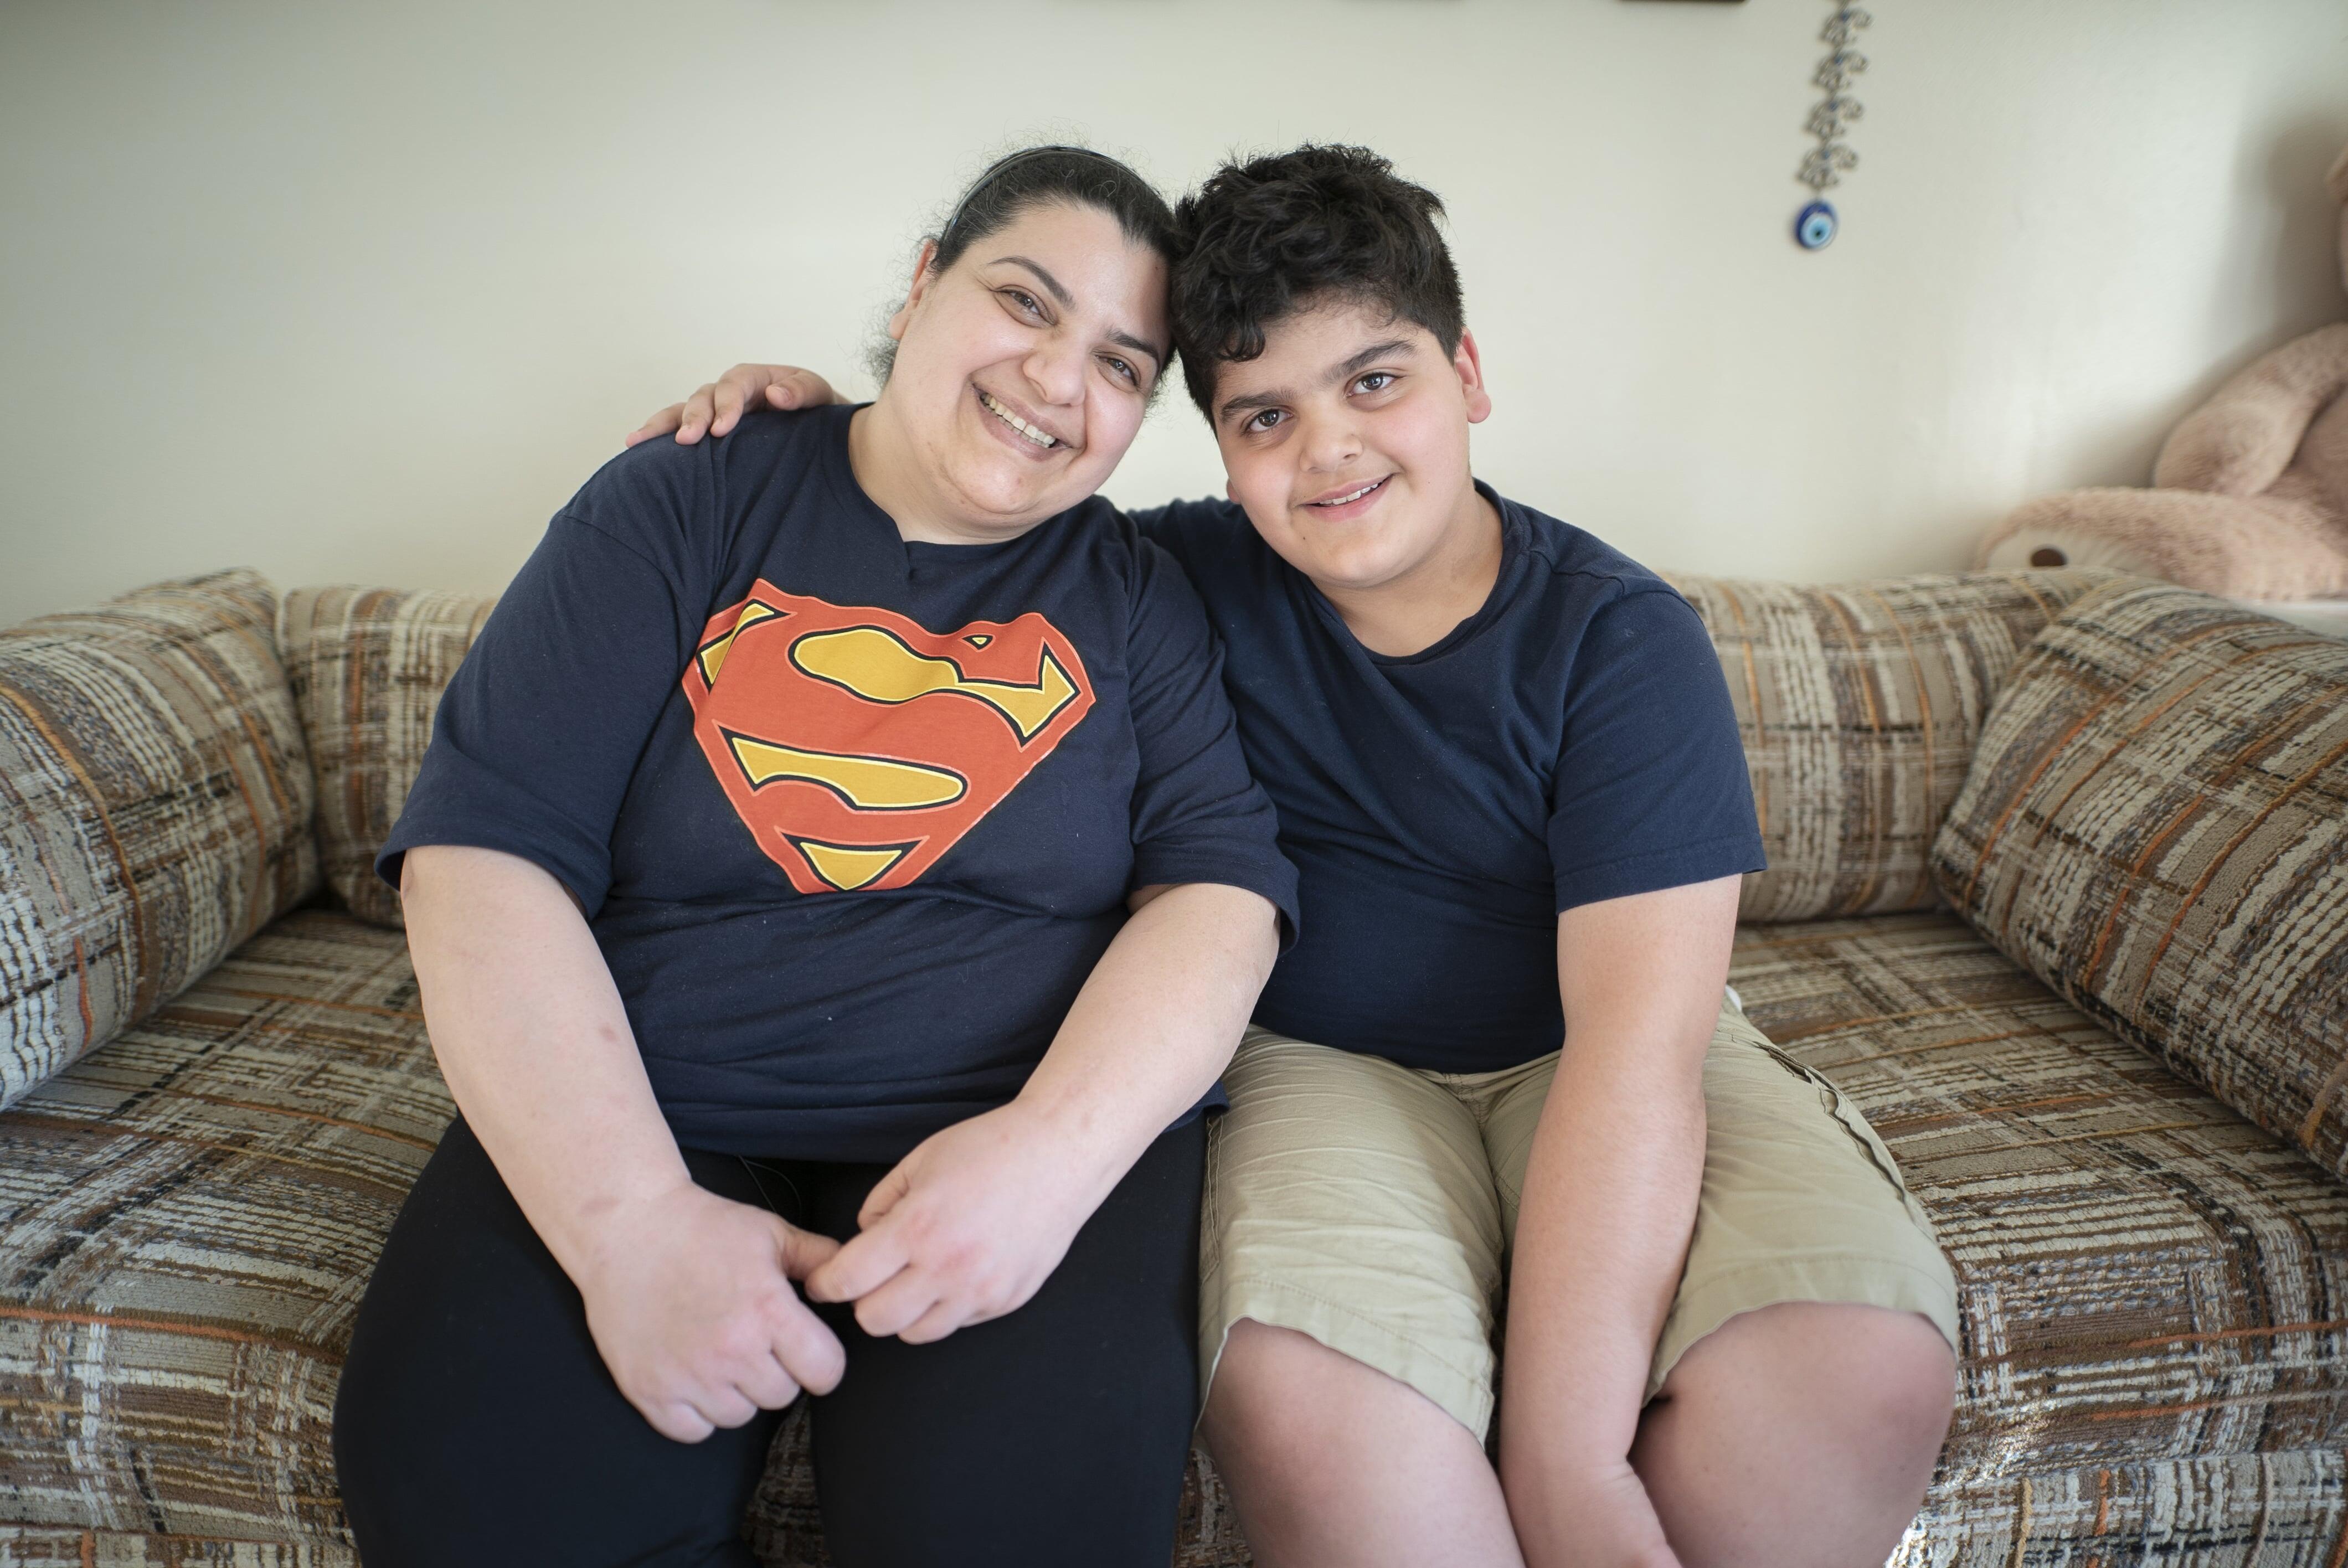 Iraqi refugees Taghreed and her 10-year-old son Yousif at their home in Seattle